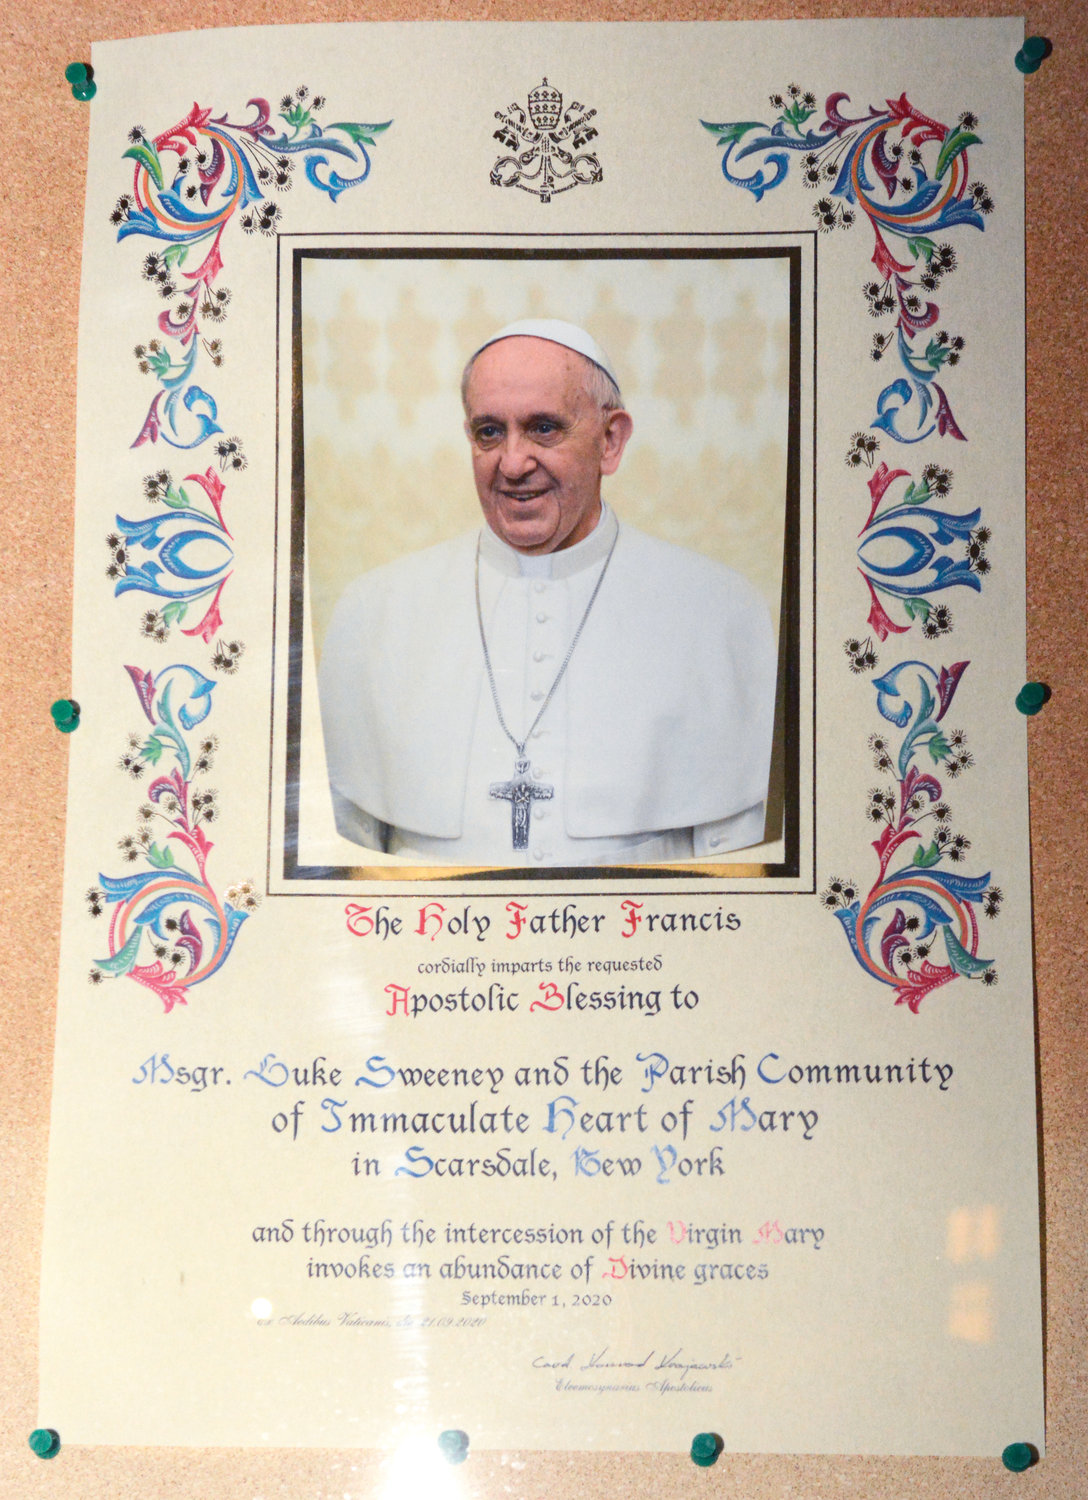 The Apostolic Blessing by Pope Francis was displayed for the occasion.